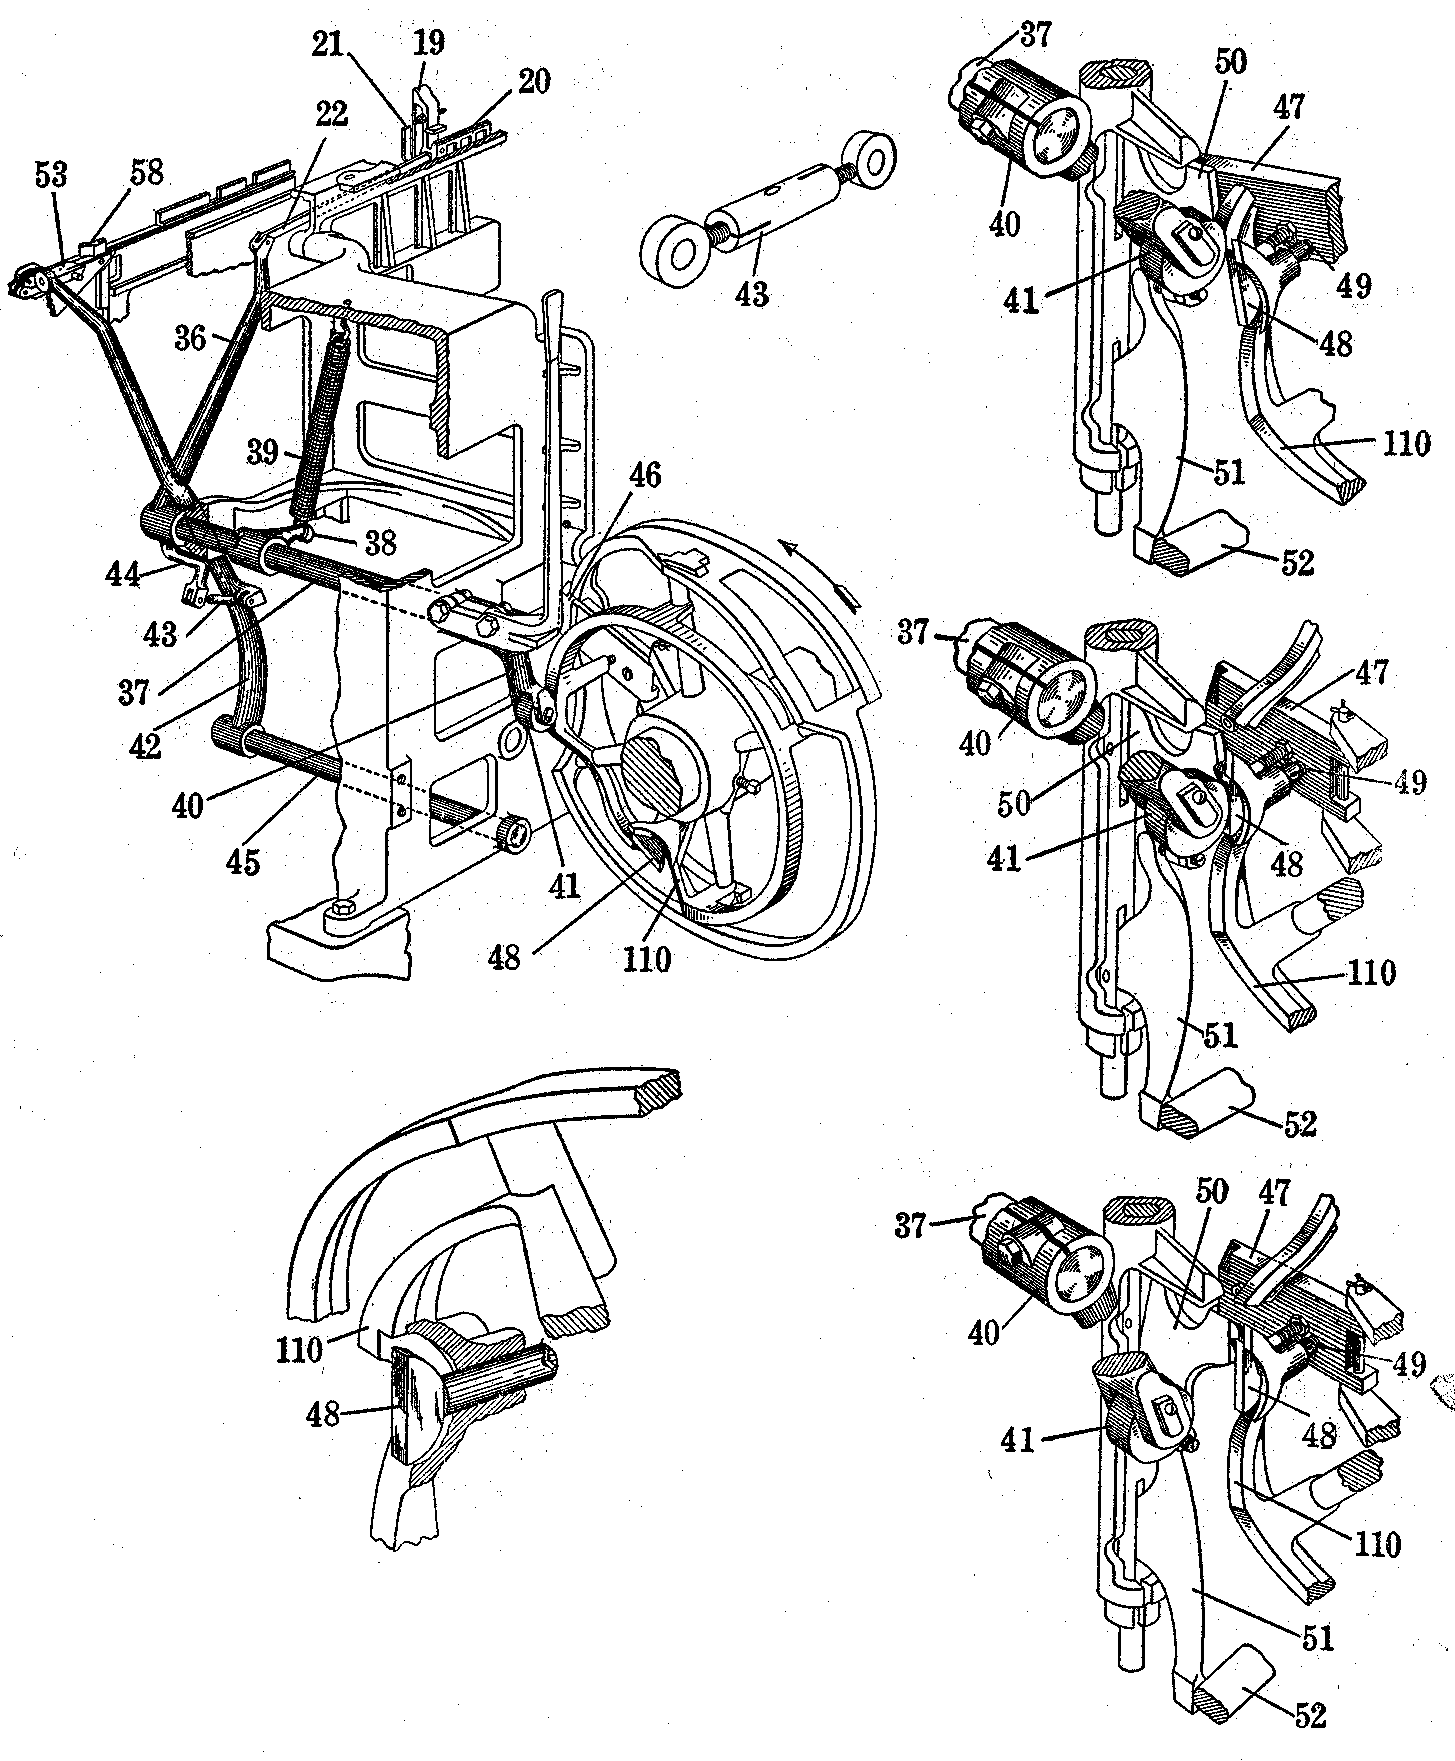 Horizontal transfer levers and cam line drawing